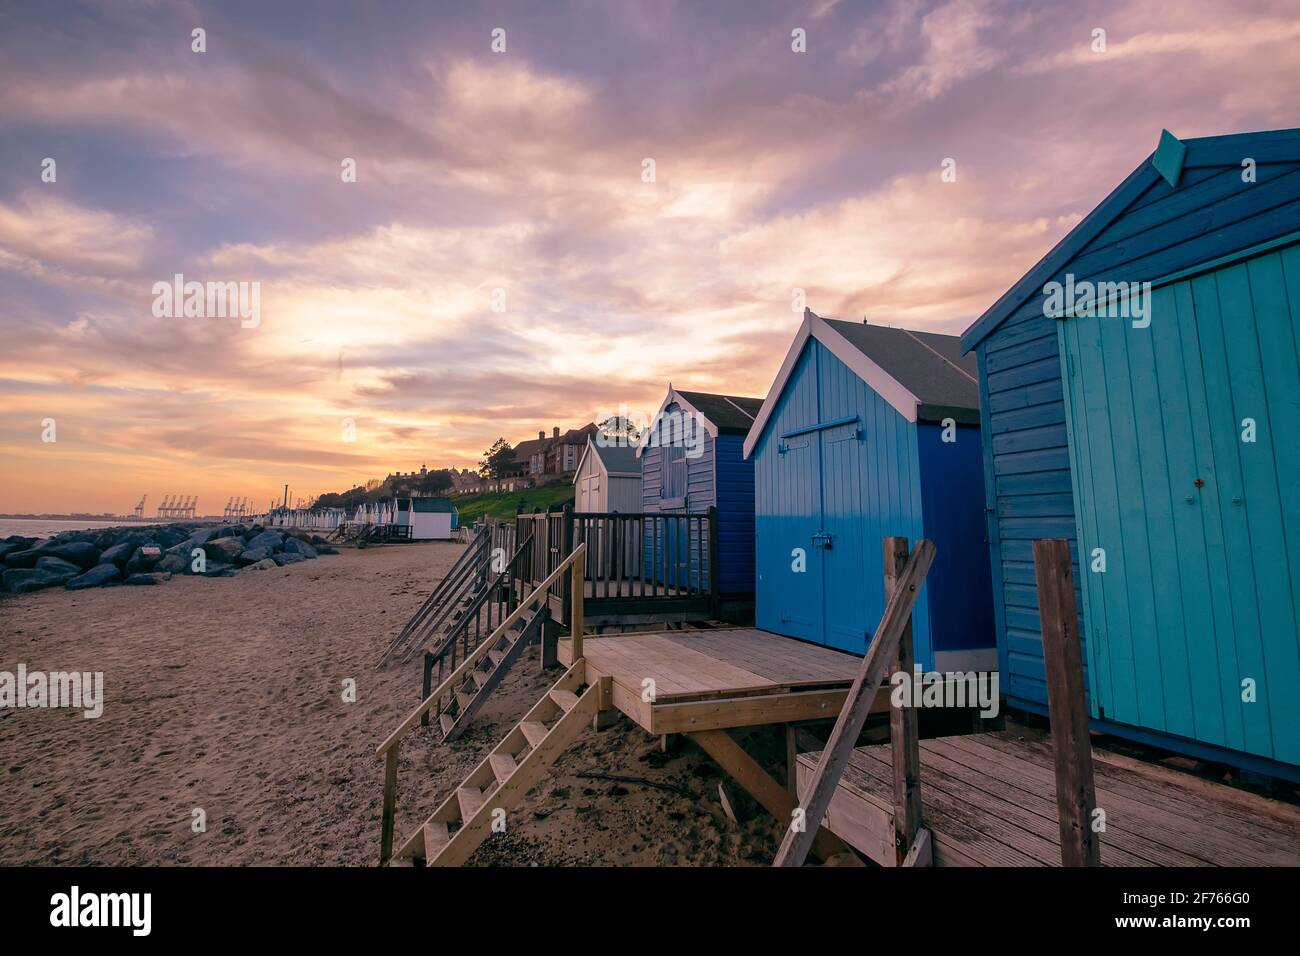 Sunset over the seafront at Felixstowe in Suffolk, UK Stock Photo